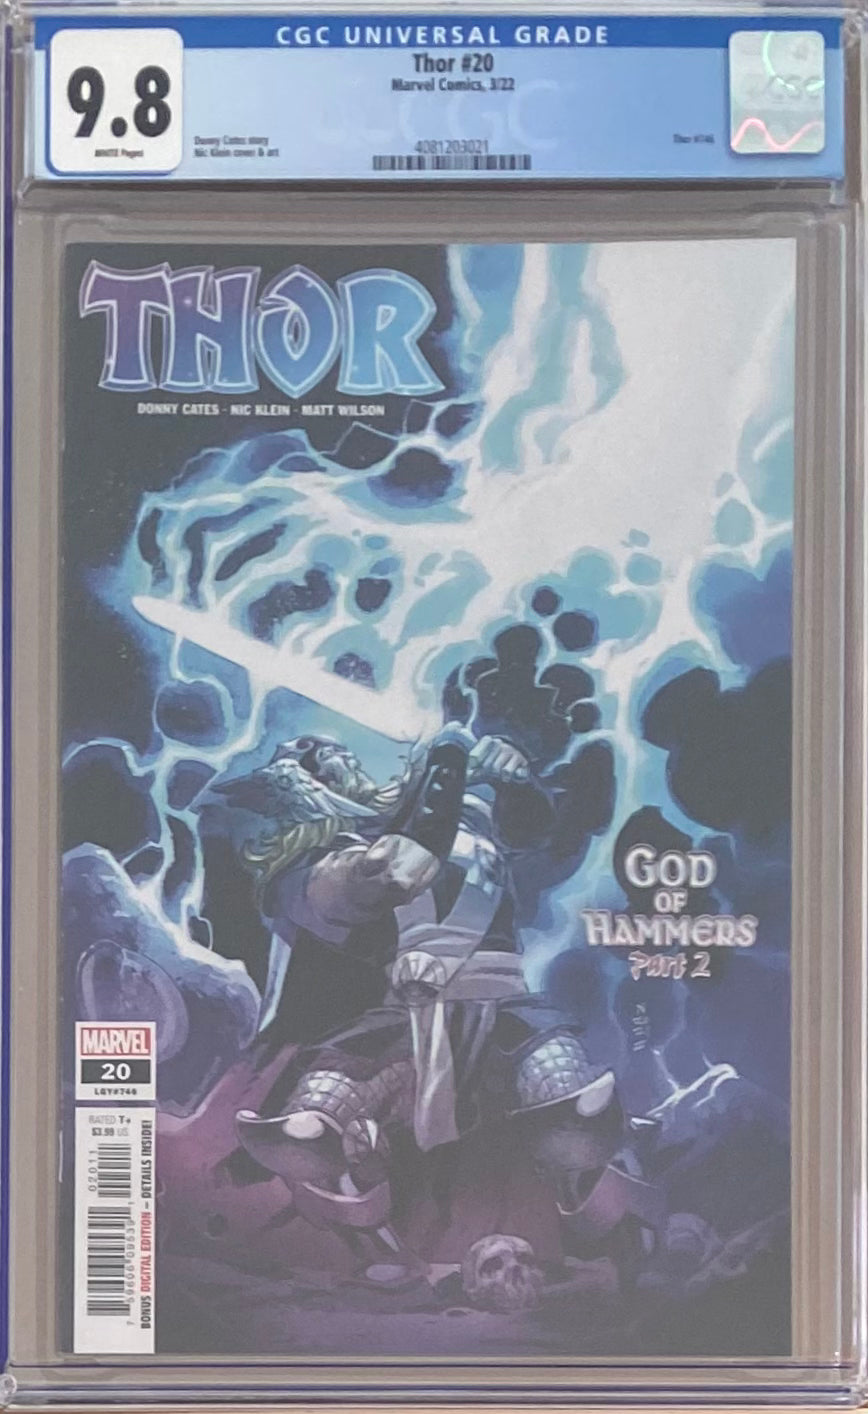 Thor #20 CGC 9.8 - First appearance God of Hammers